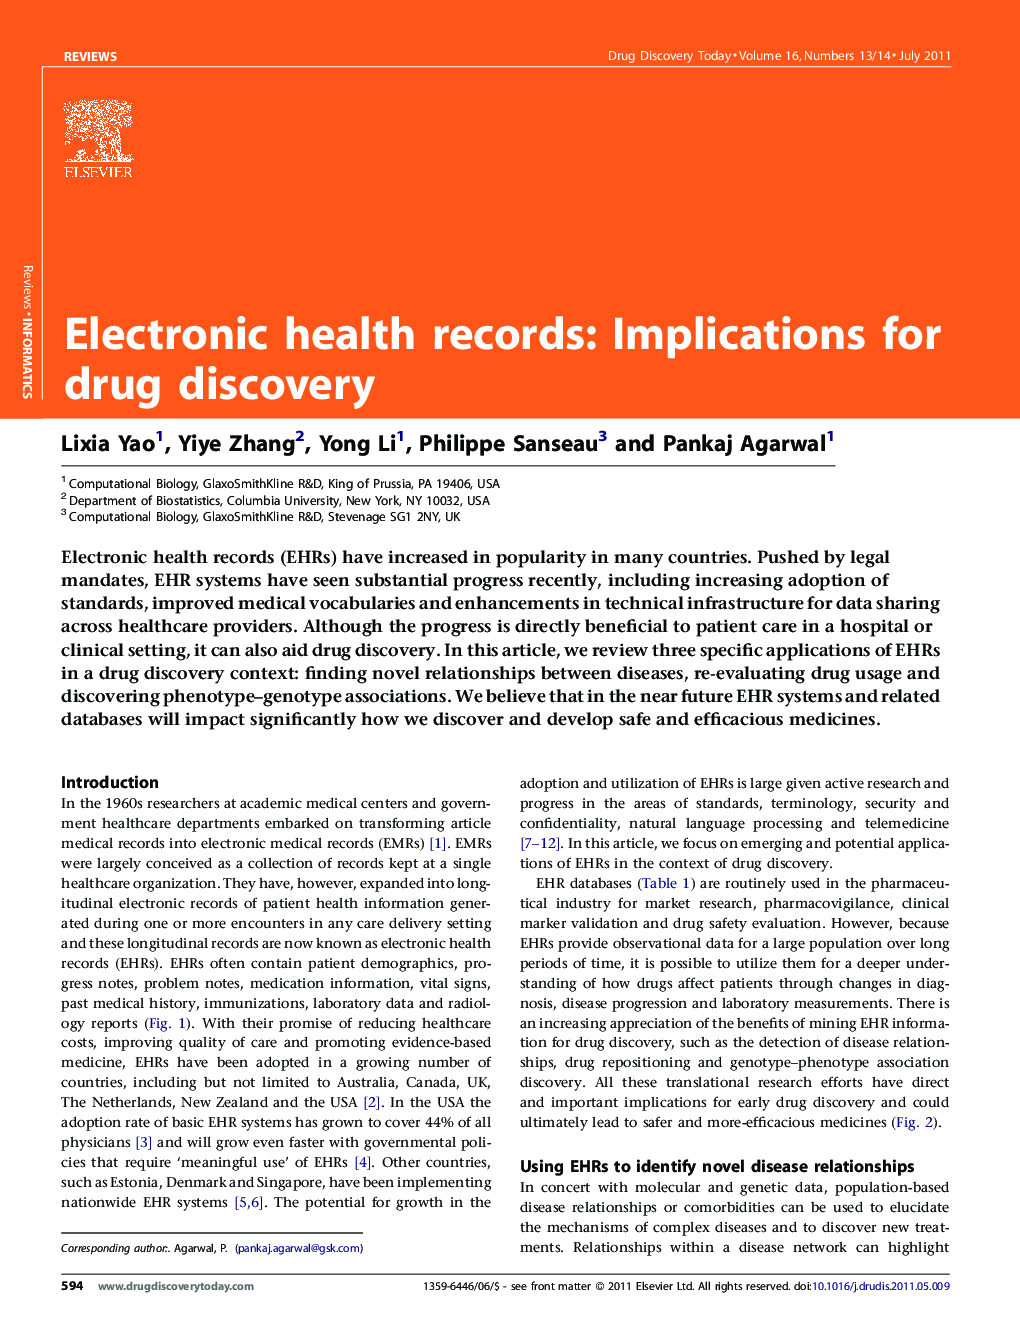 Electronic health records: Implications for drug discovery